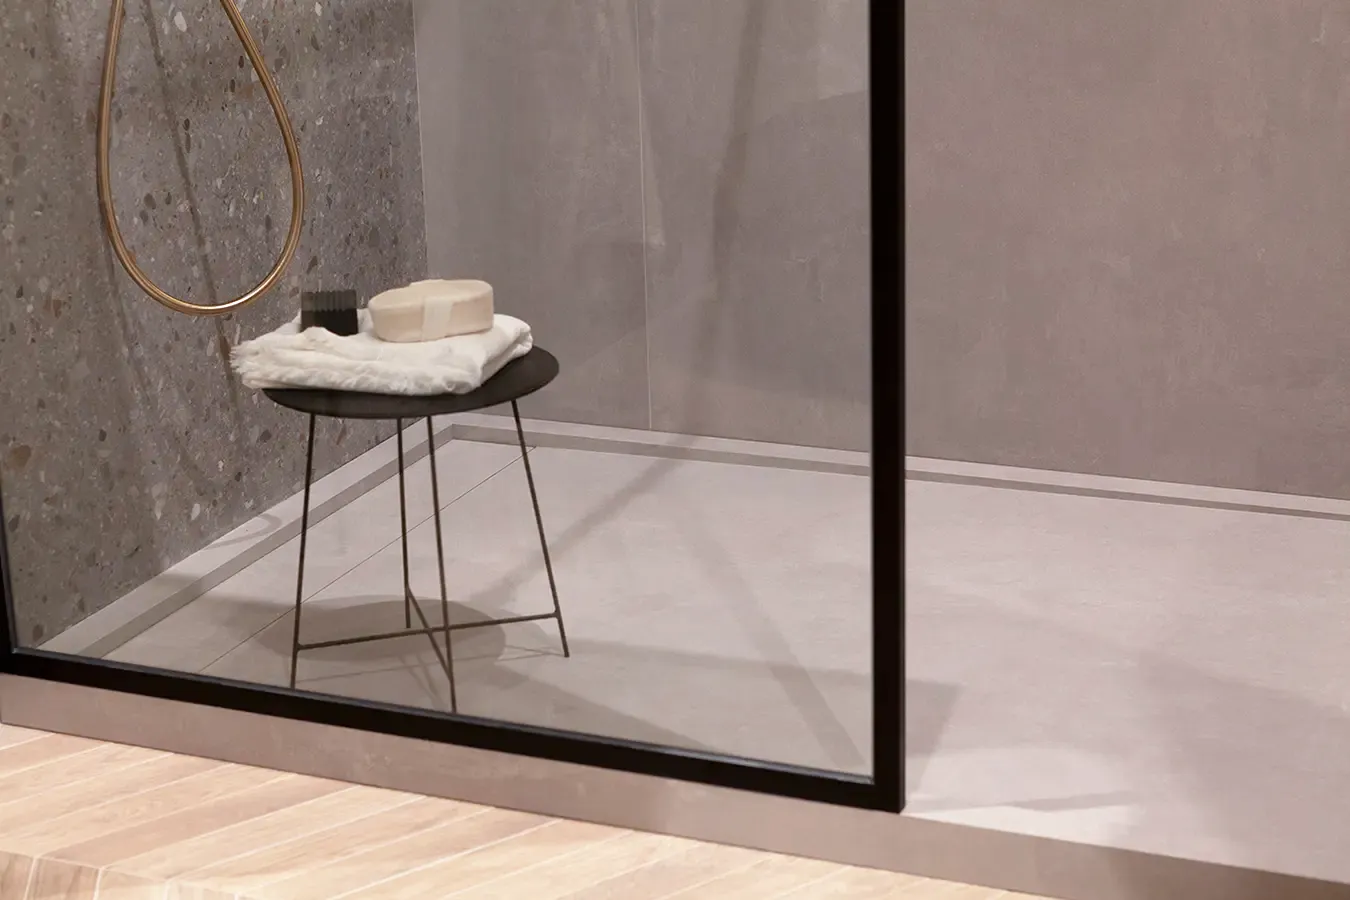 Shower trays in porcelain stoneware